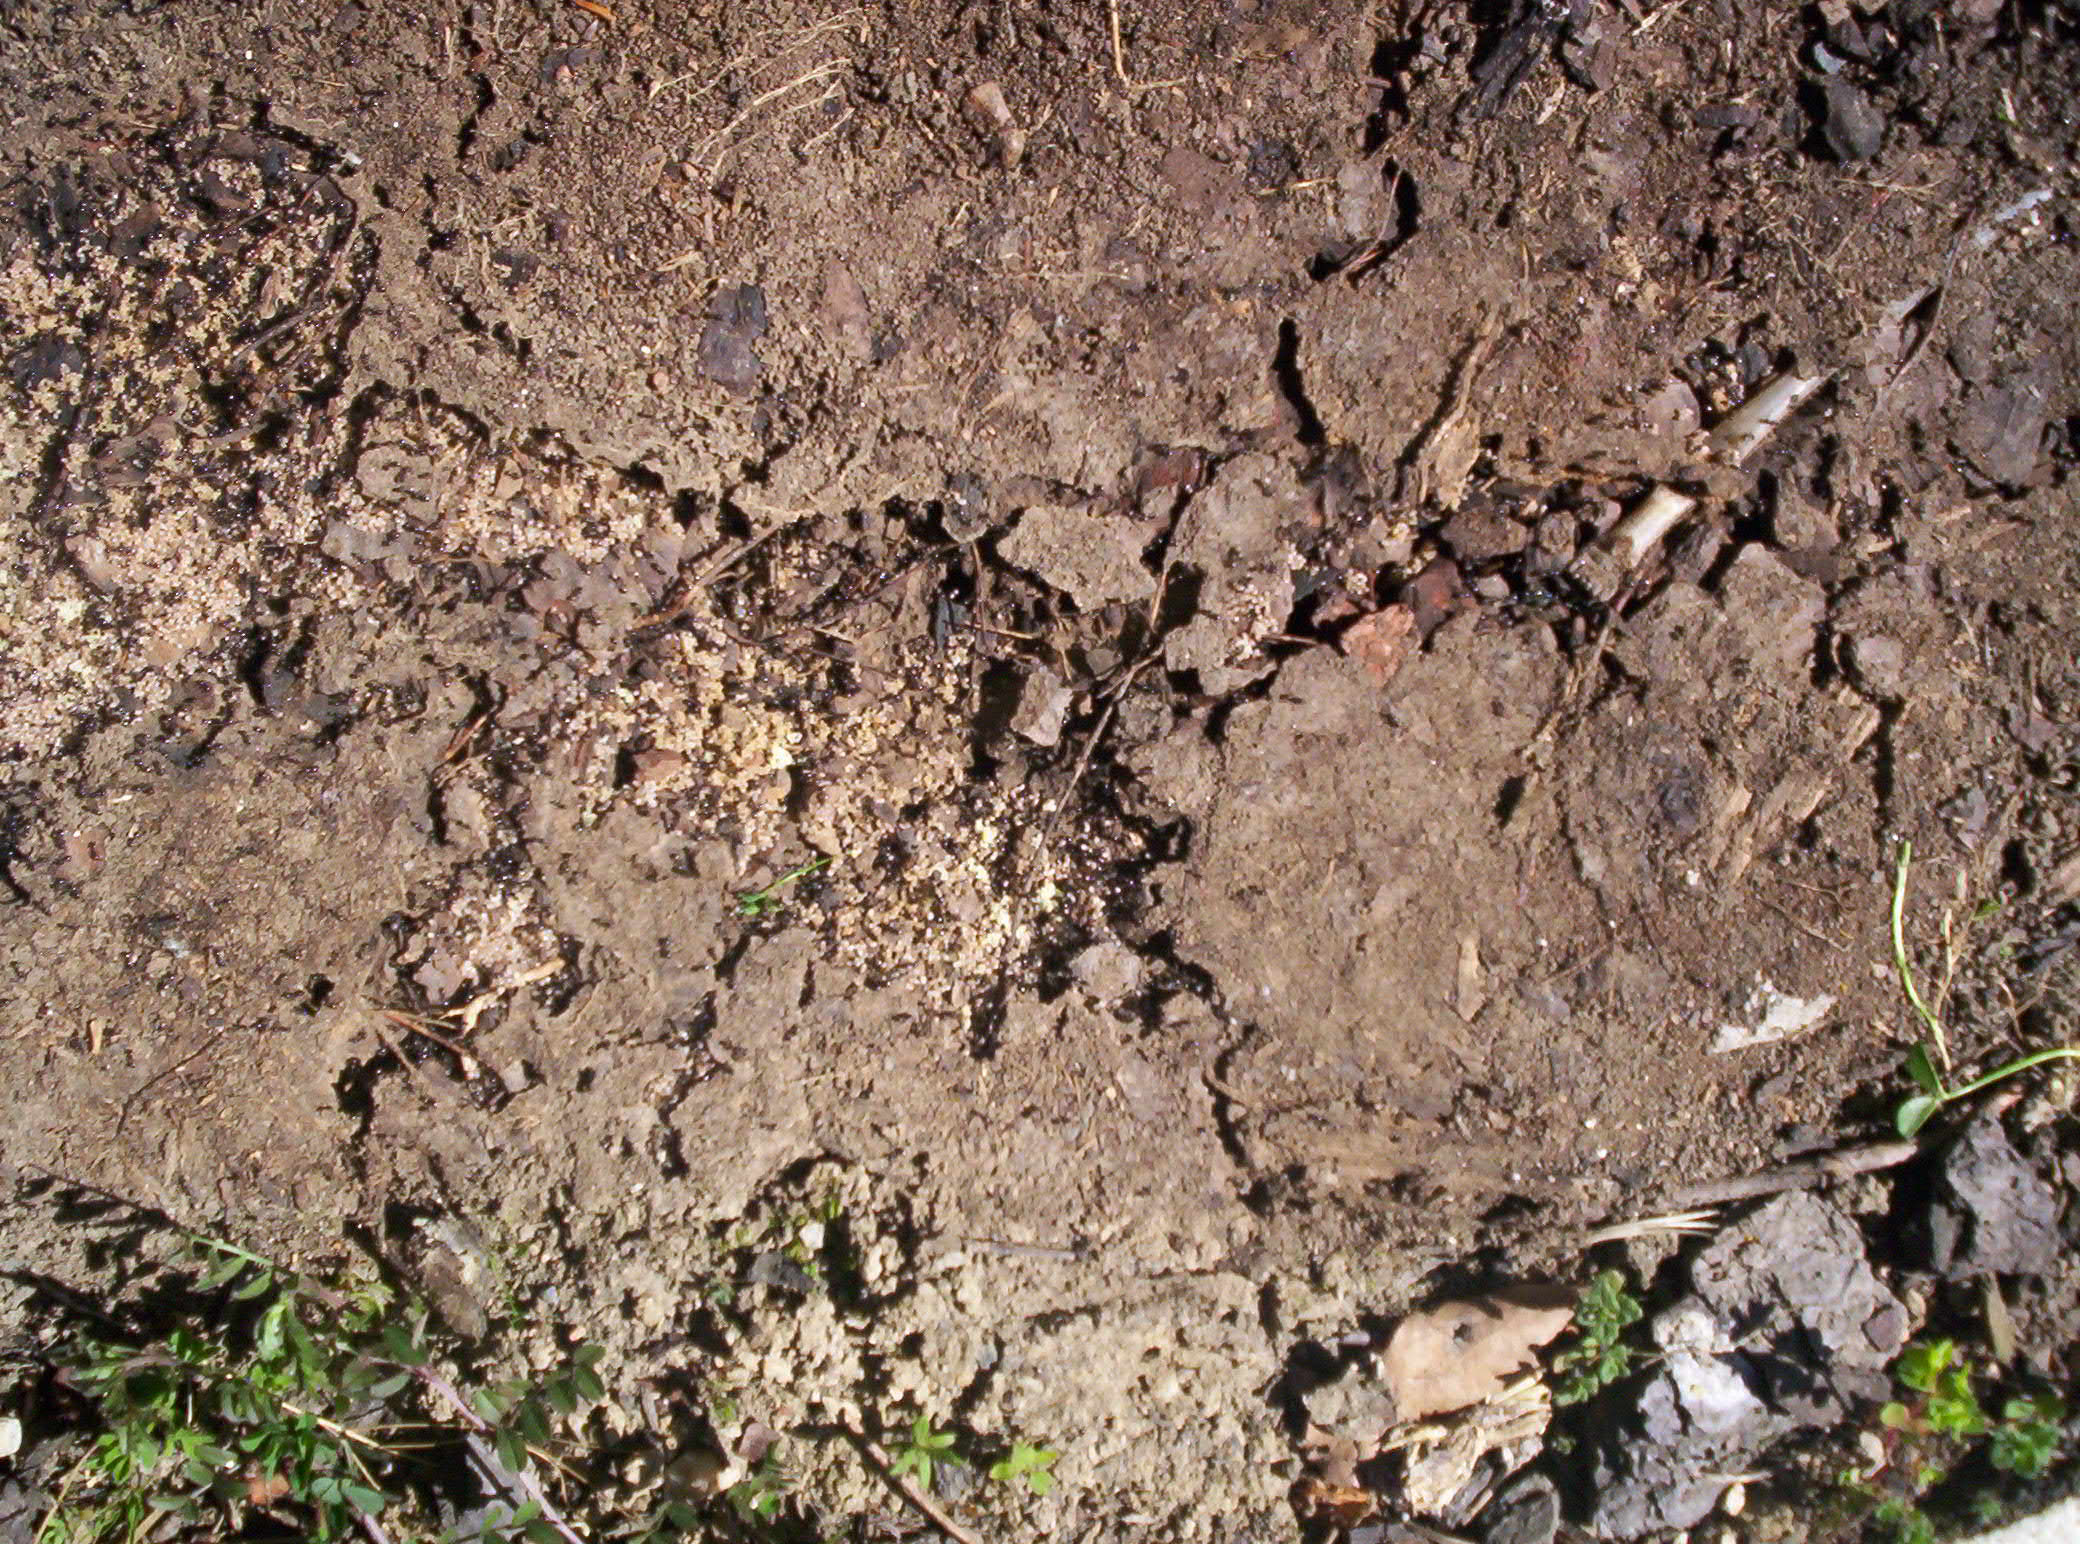 Exposed, Ants, Black, Brown, Bspo06, HQ Photo